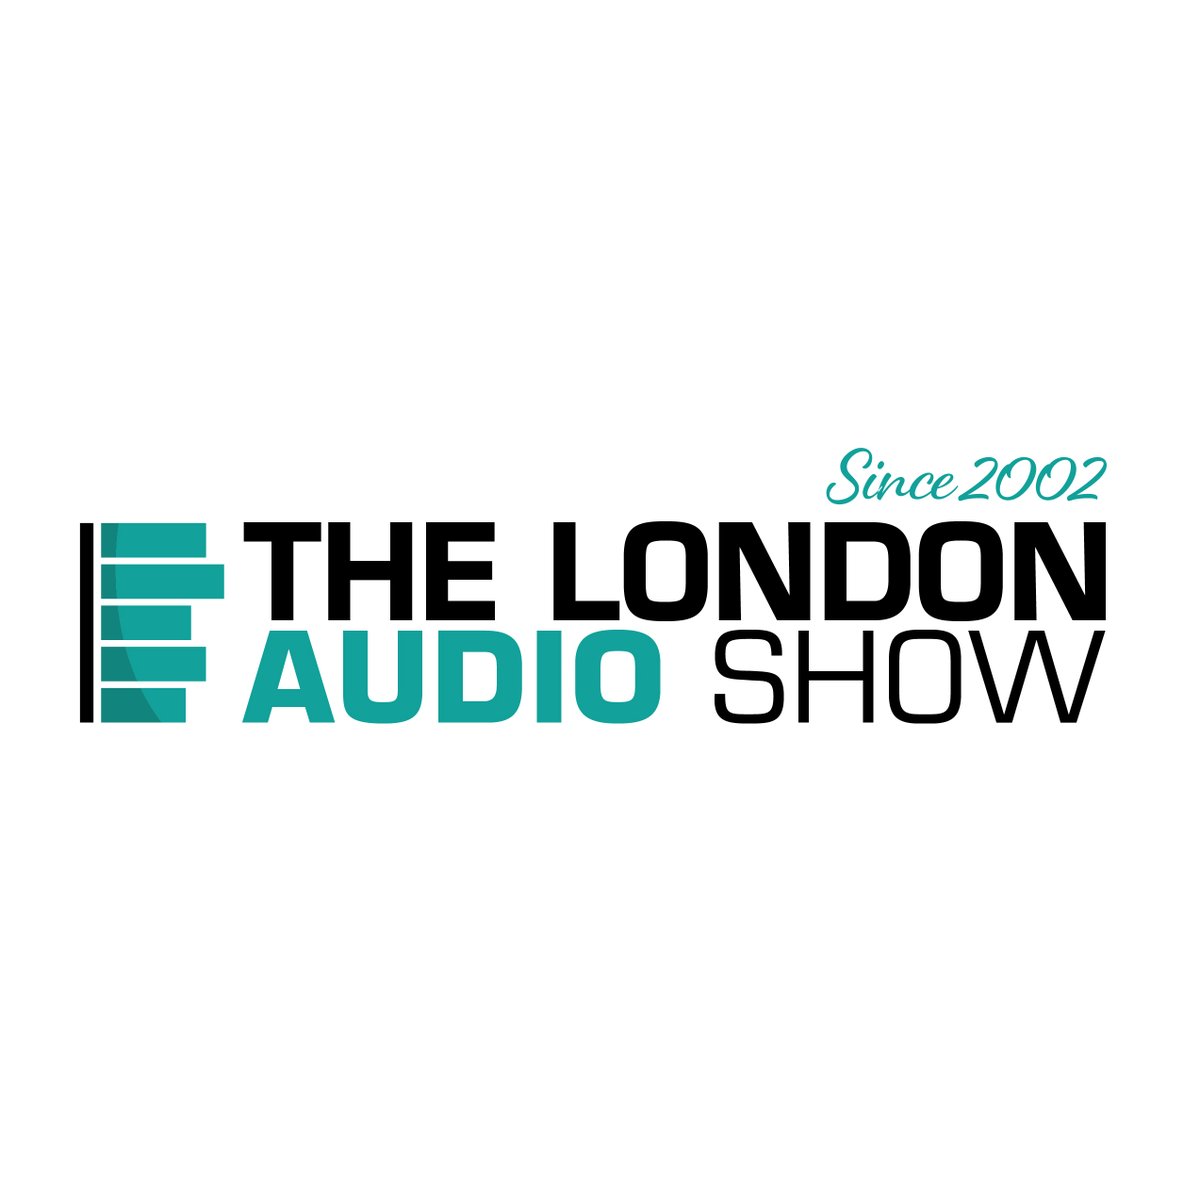 Just over 4 months to go for the return of a Classic Audio Show The London Audio Show 2024 April 20/21 Get your early bird tickets now. Free parking all weekend. Use the link below to read more chestergroup.org/the-london-aud…